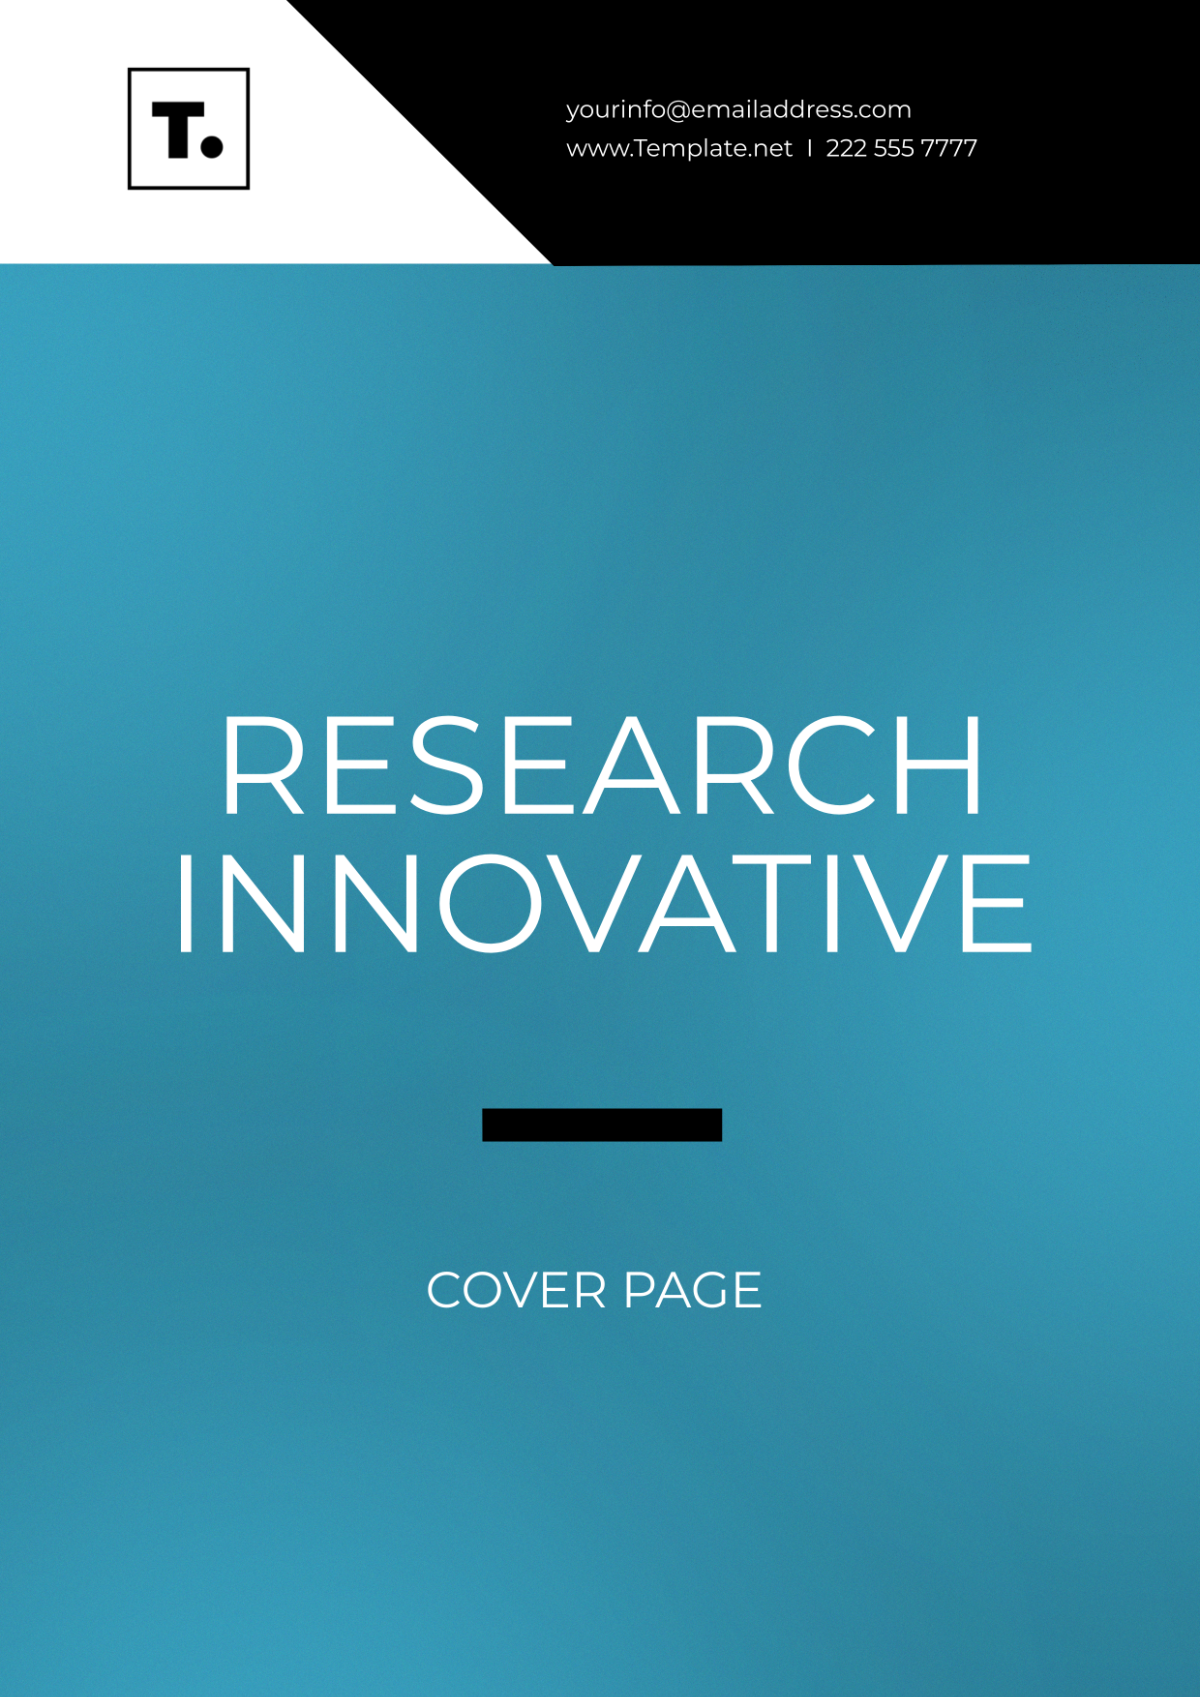 Research Innovative Cover Page Template